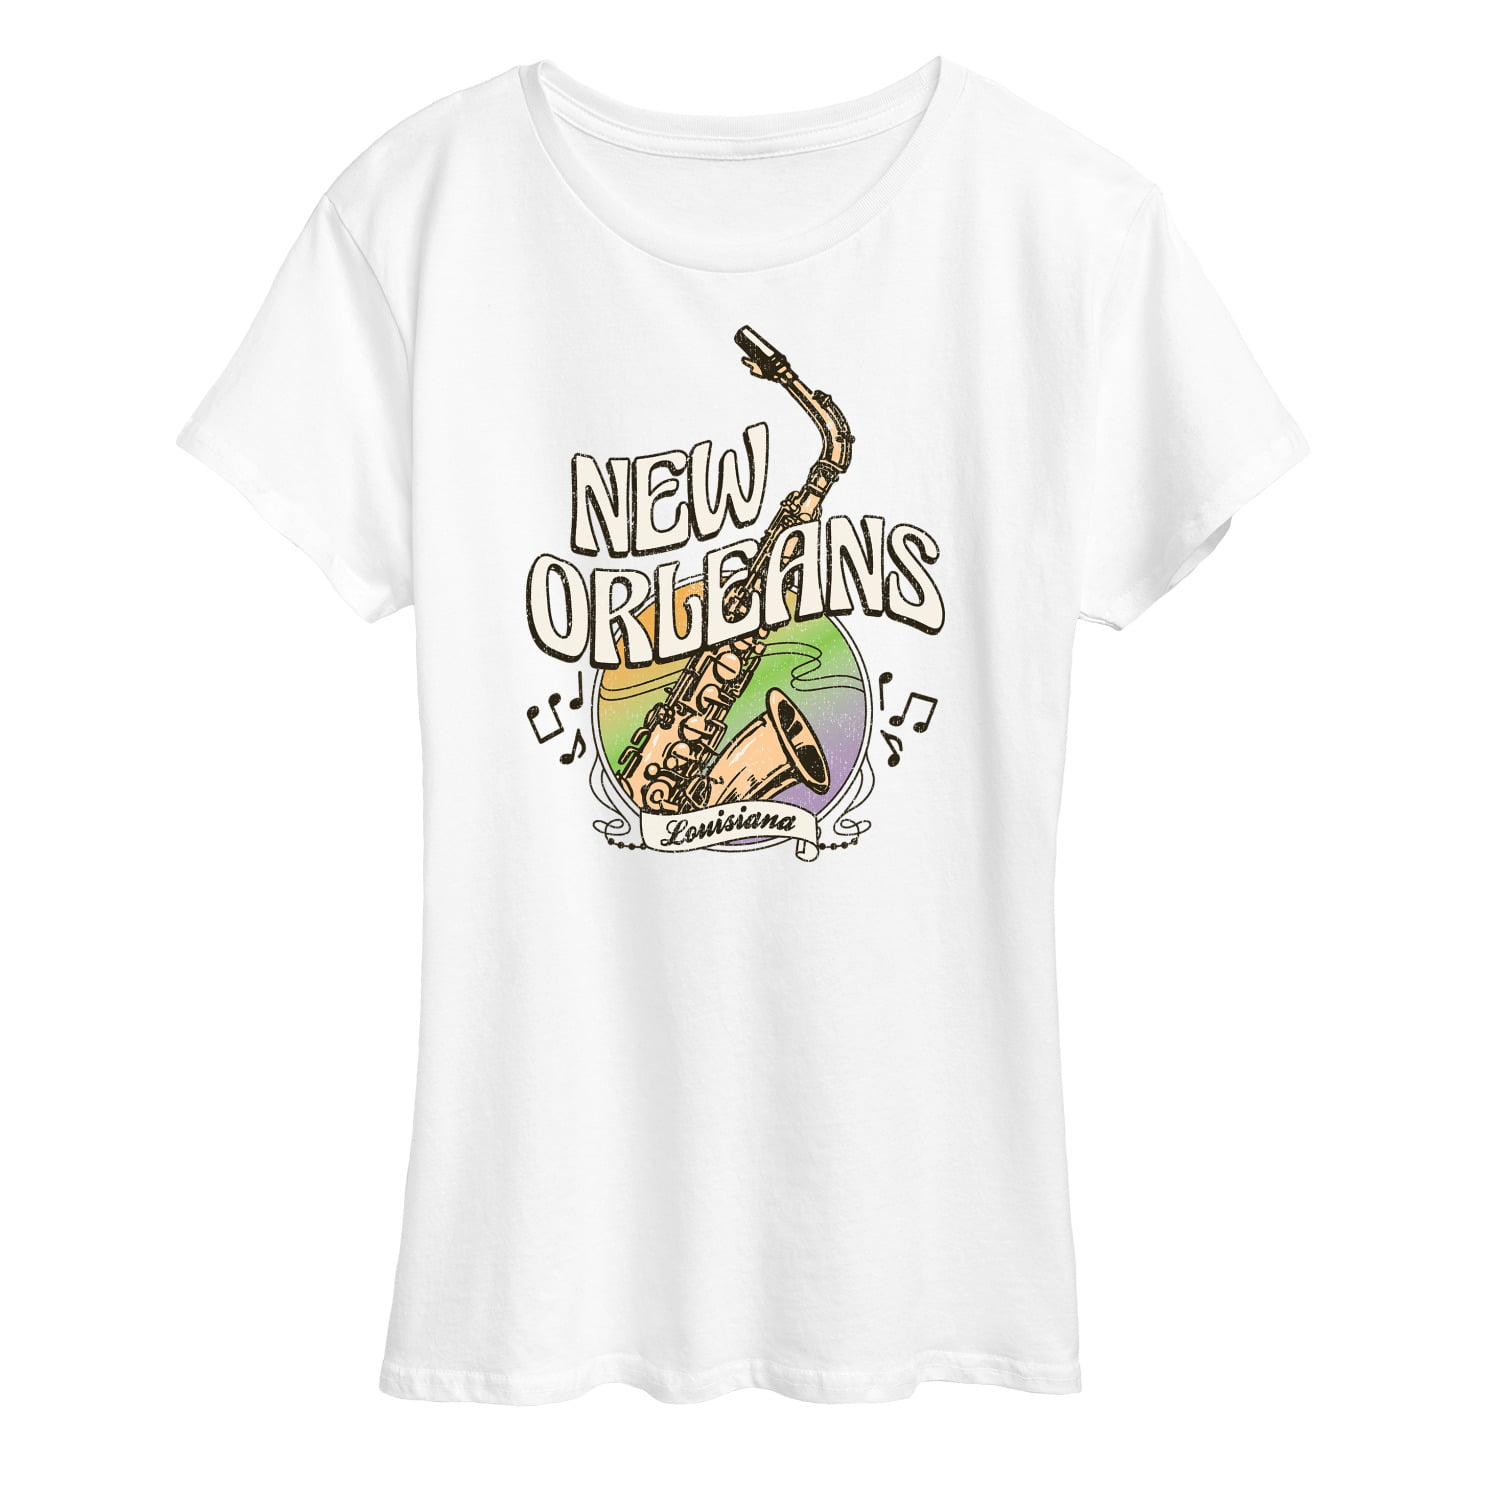 Instant Message - New Orleans - Women's Short Sleeve Graphic T-Shirt 